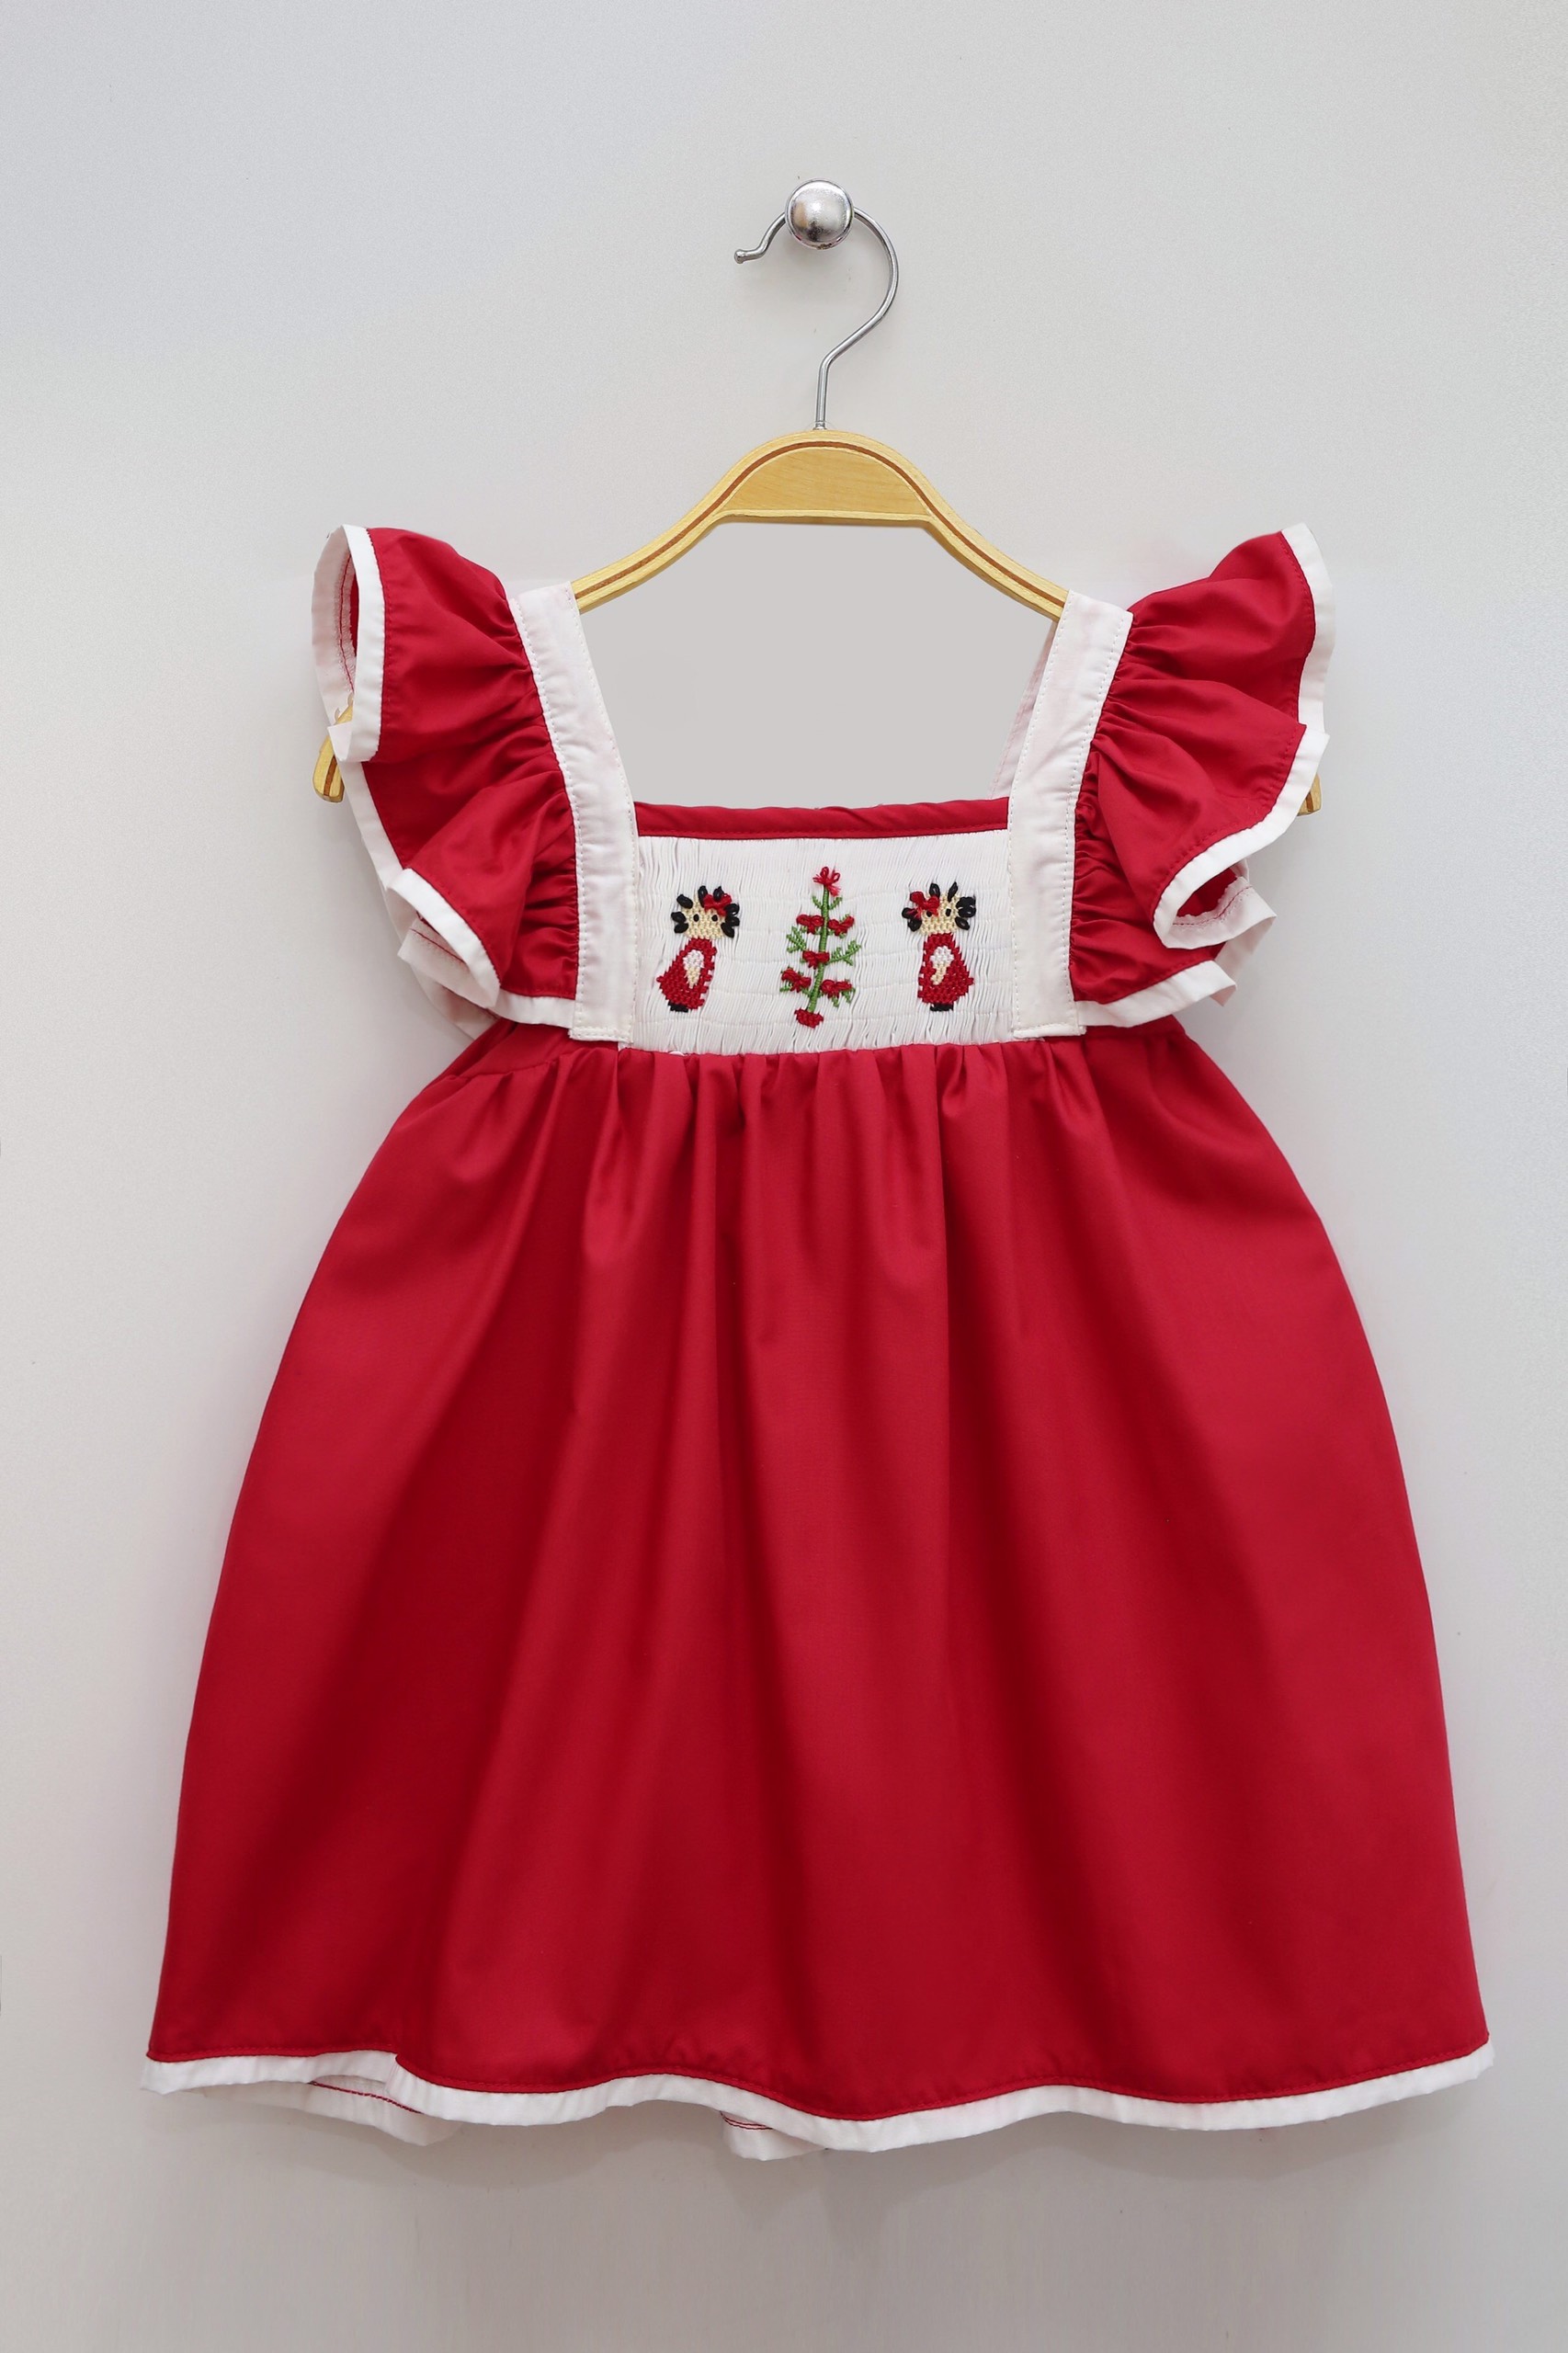 Red sundress for girls to wear on Tet holiday